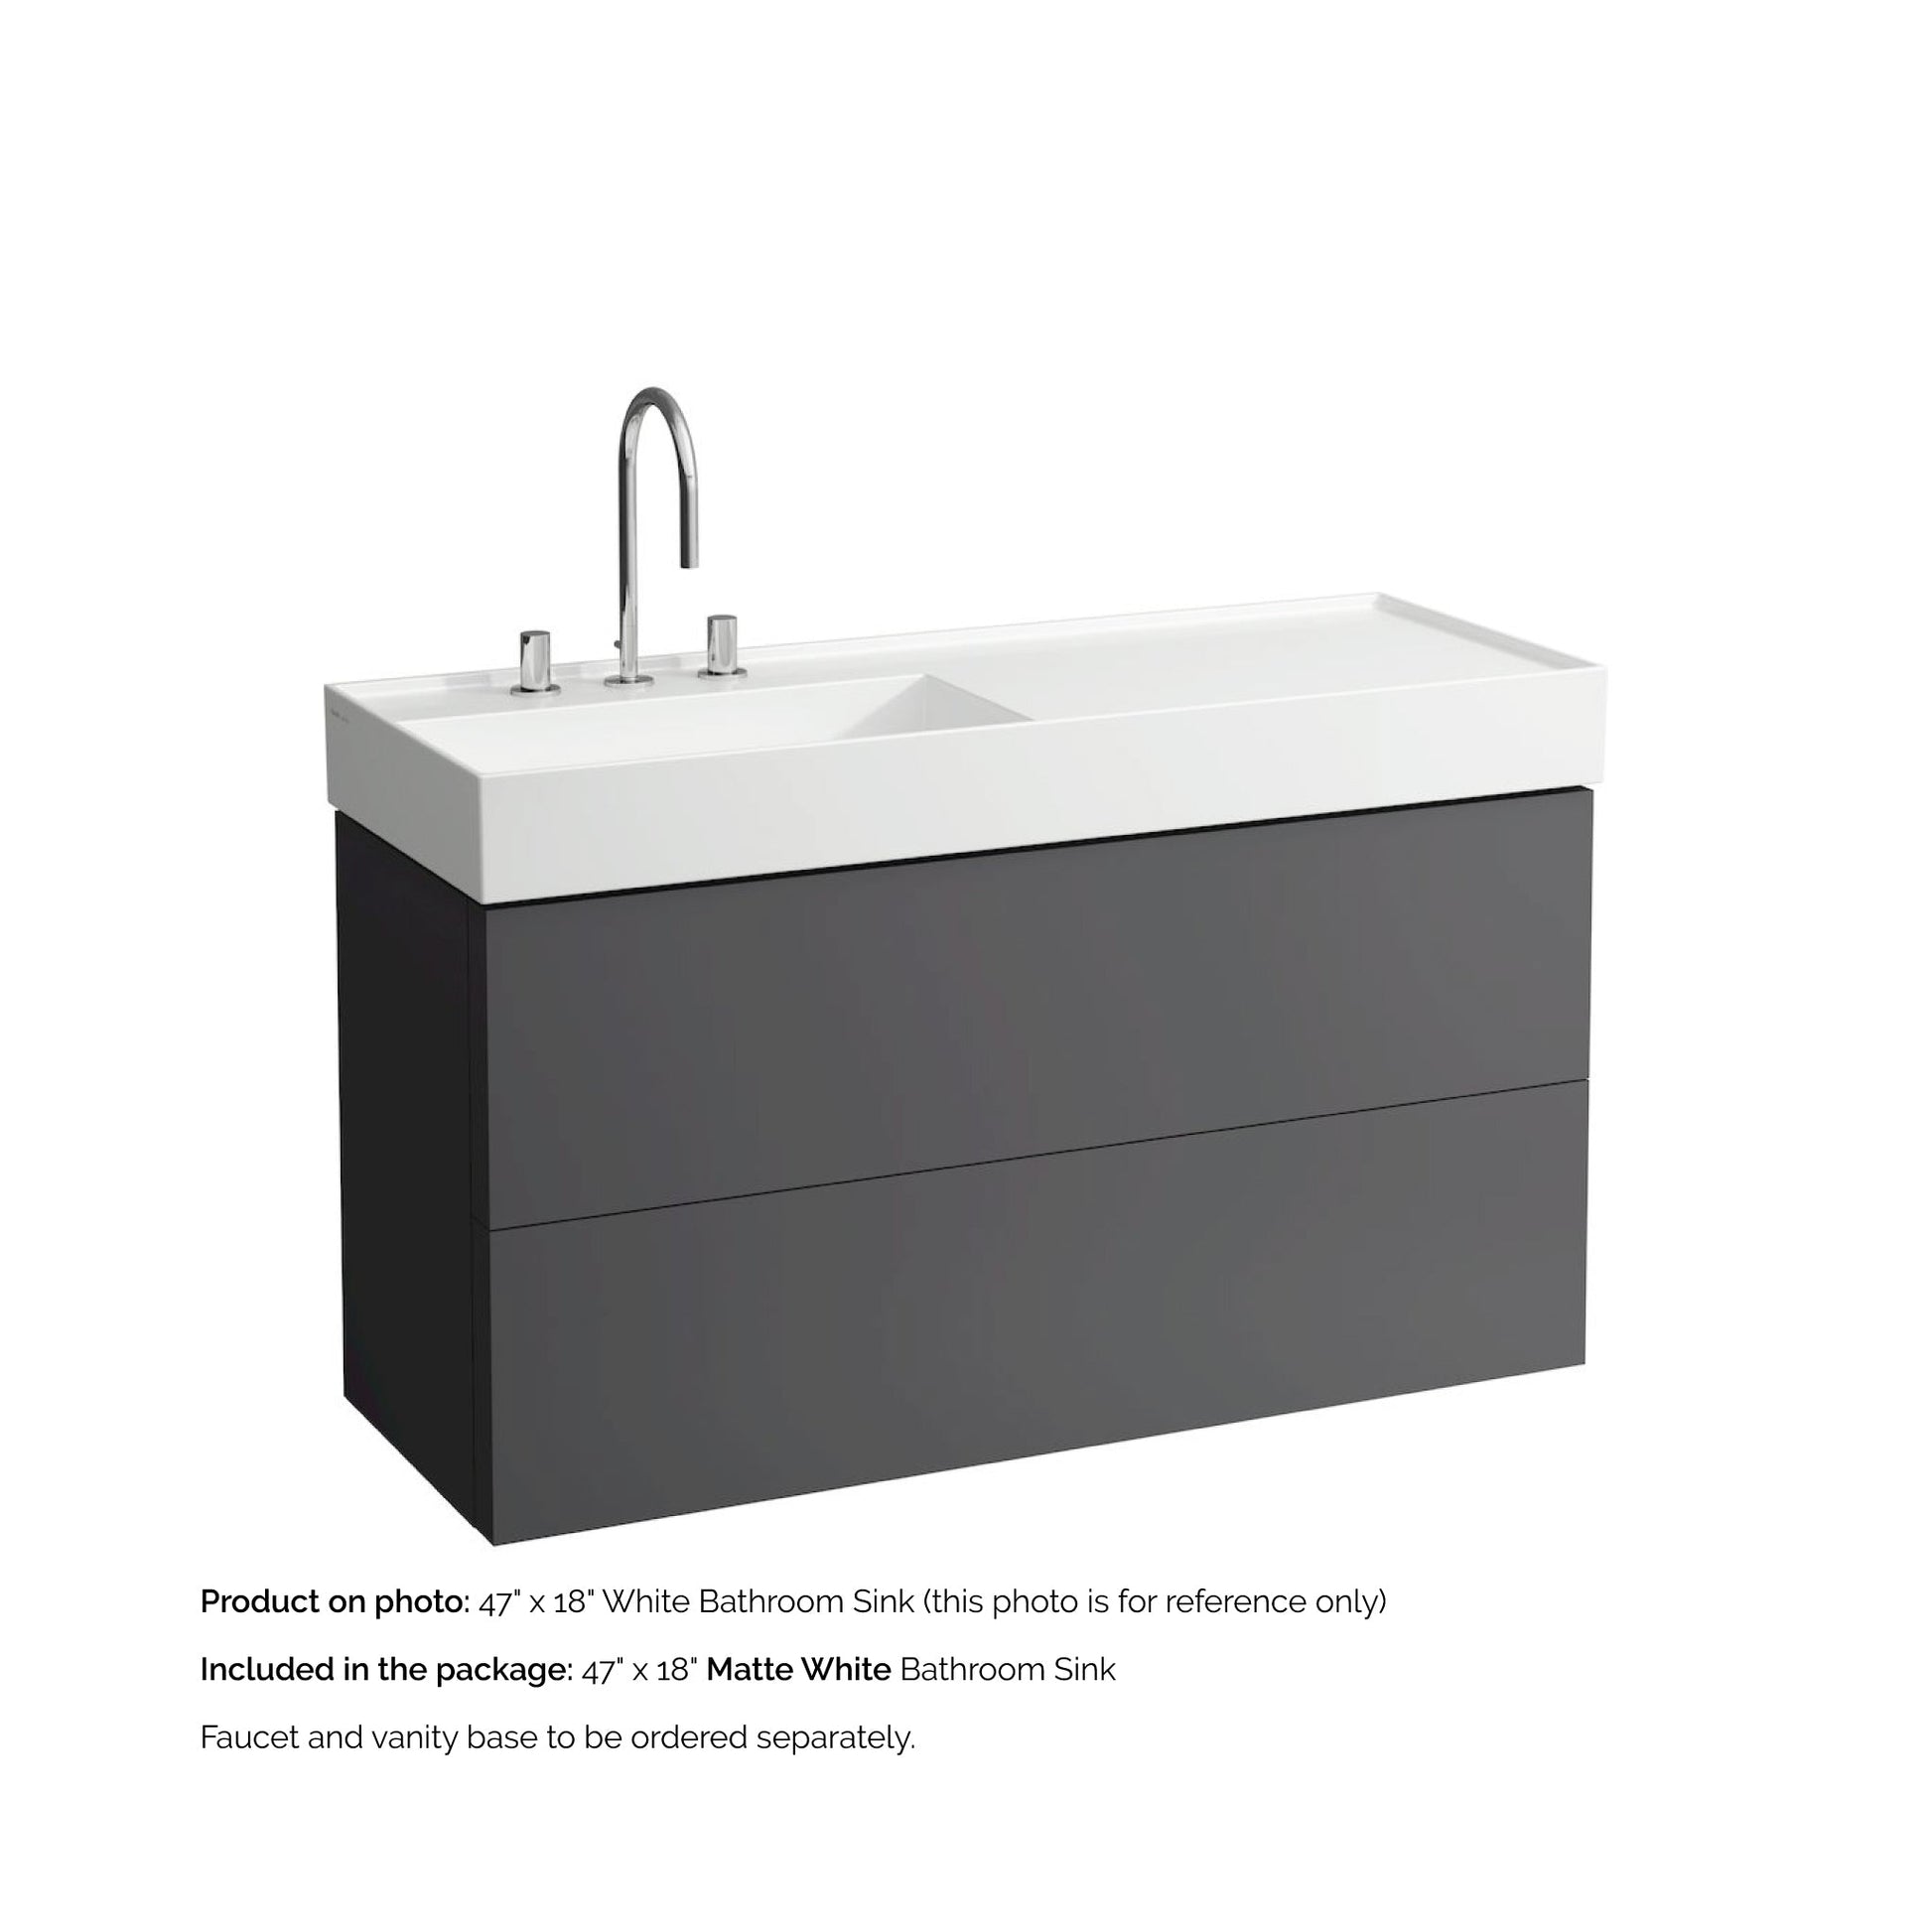 Laufen Kartell 47" x 18" Matte White Wall-Mounted Shelf-Right Bathroom Sink With 3 Faucet Holes